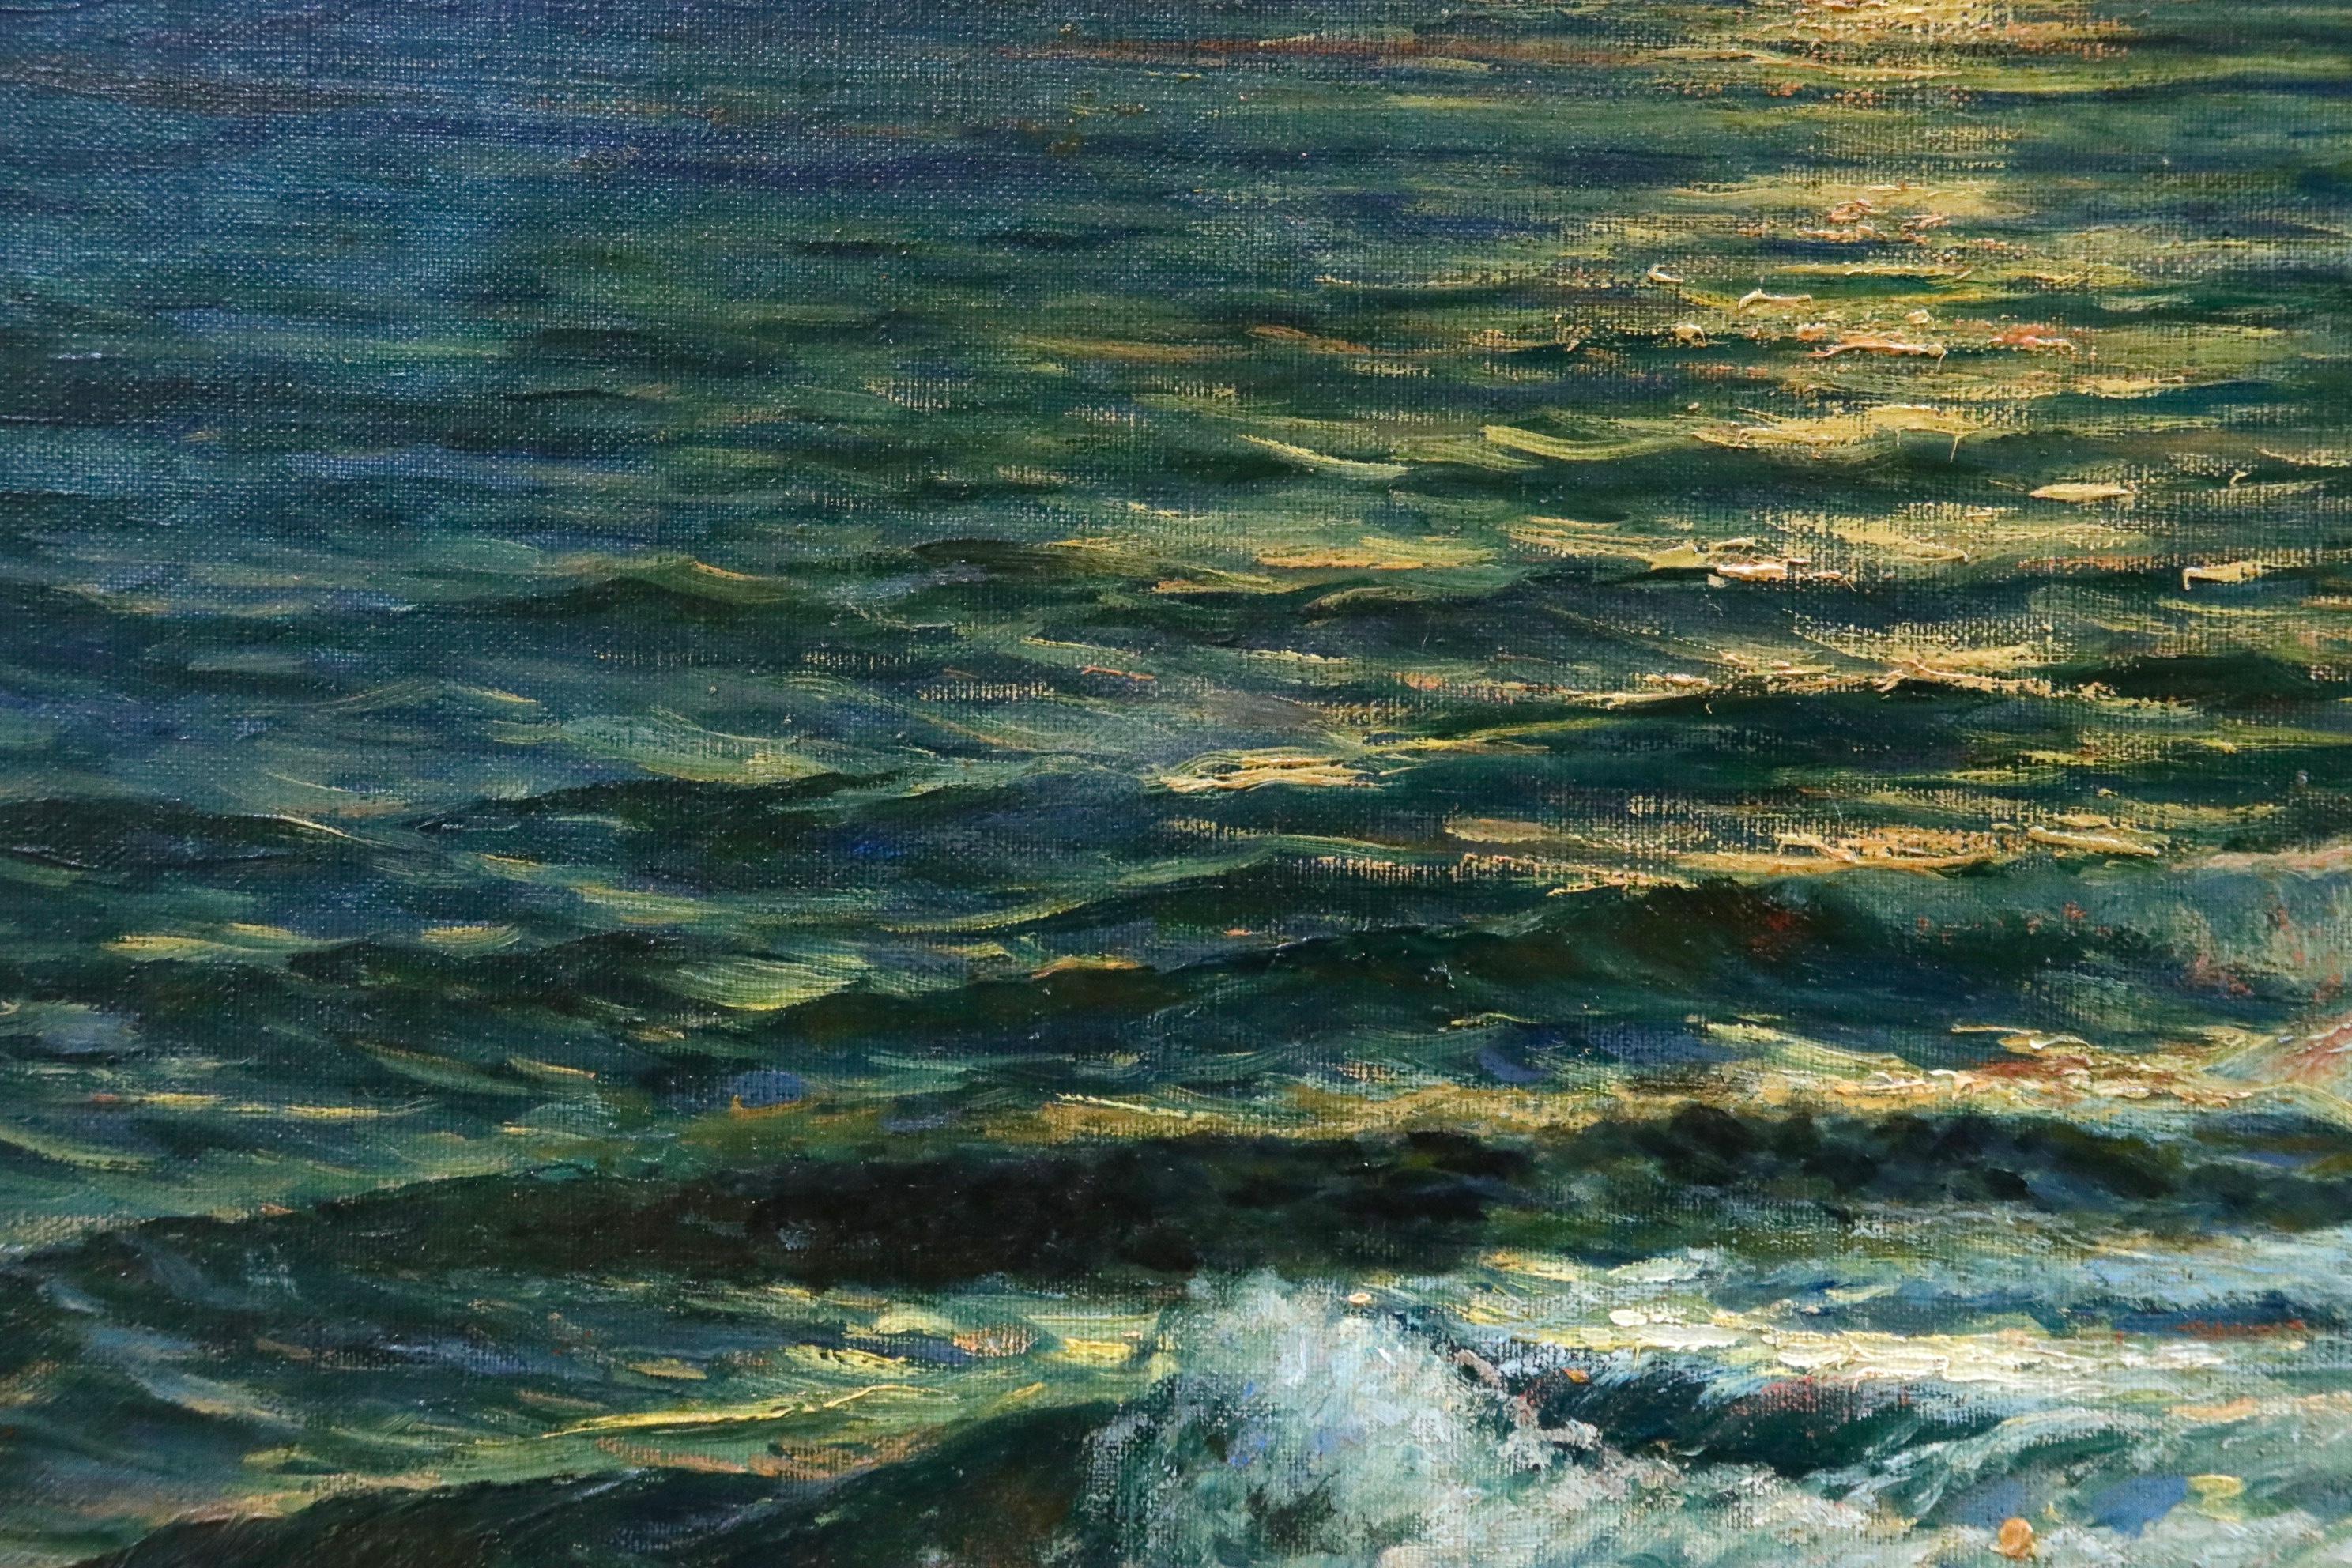 Oil on canvas by Wartan Mahokian depicting a boat at sea as the setting sun reflects on waves crashing against rocks. Signed twice lower right. Framed dimensions are 23 inches high and 29 inches wide.

Provenance: Private American